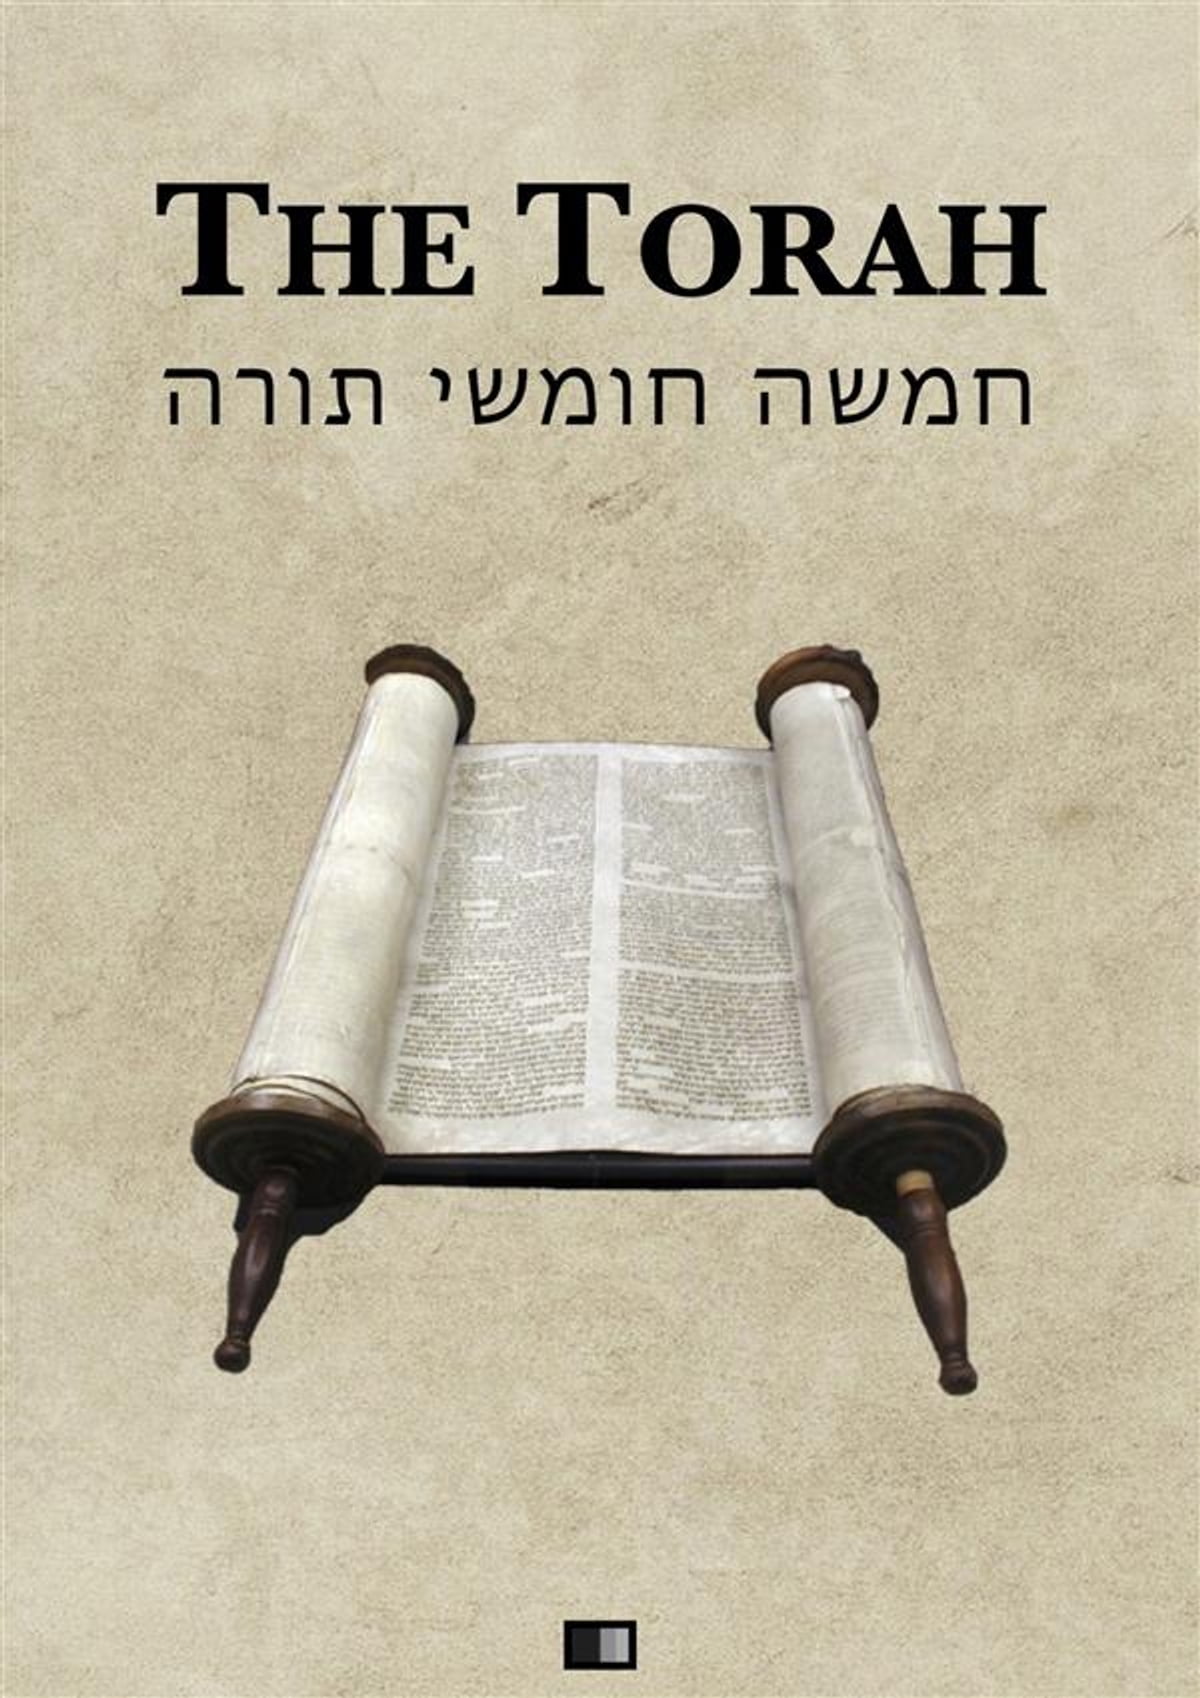 Torah: The Father of Israel-Part 1